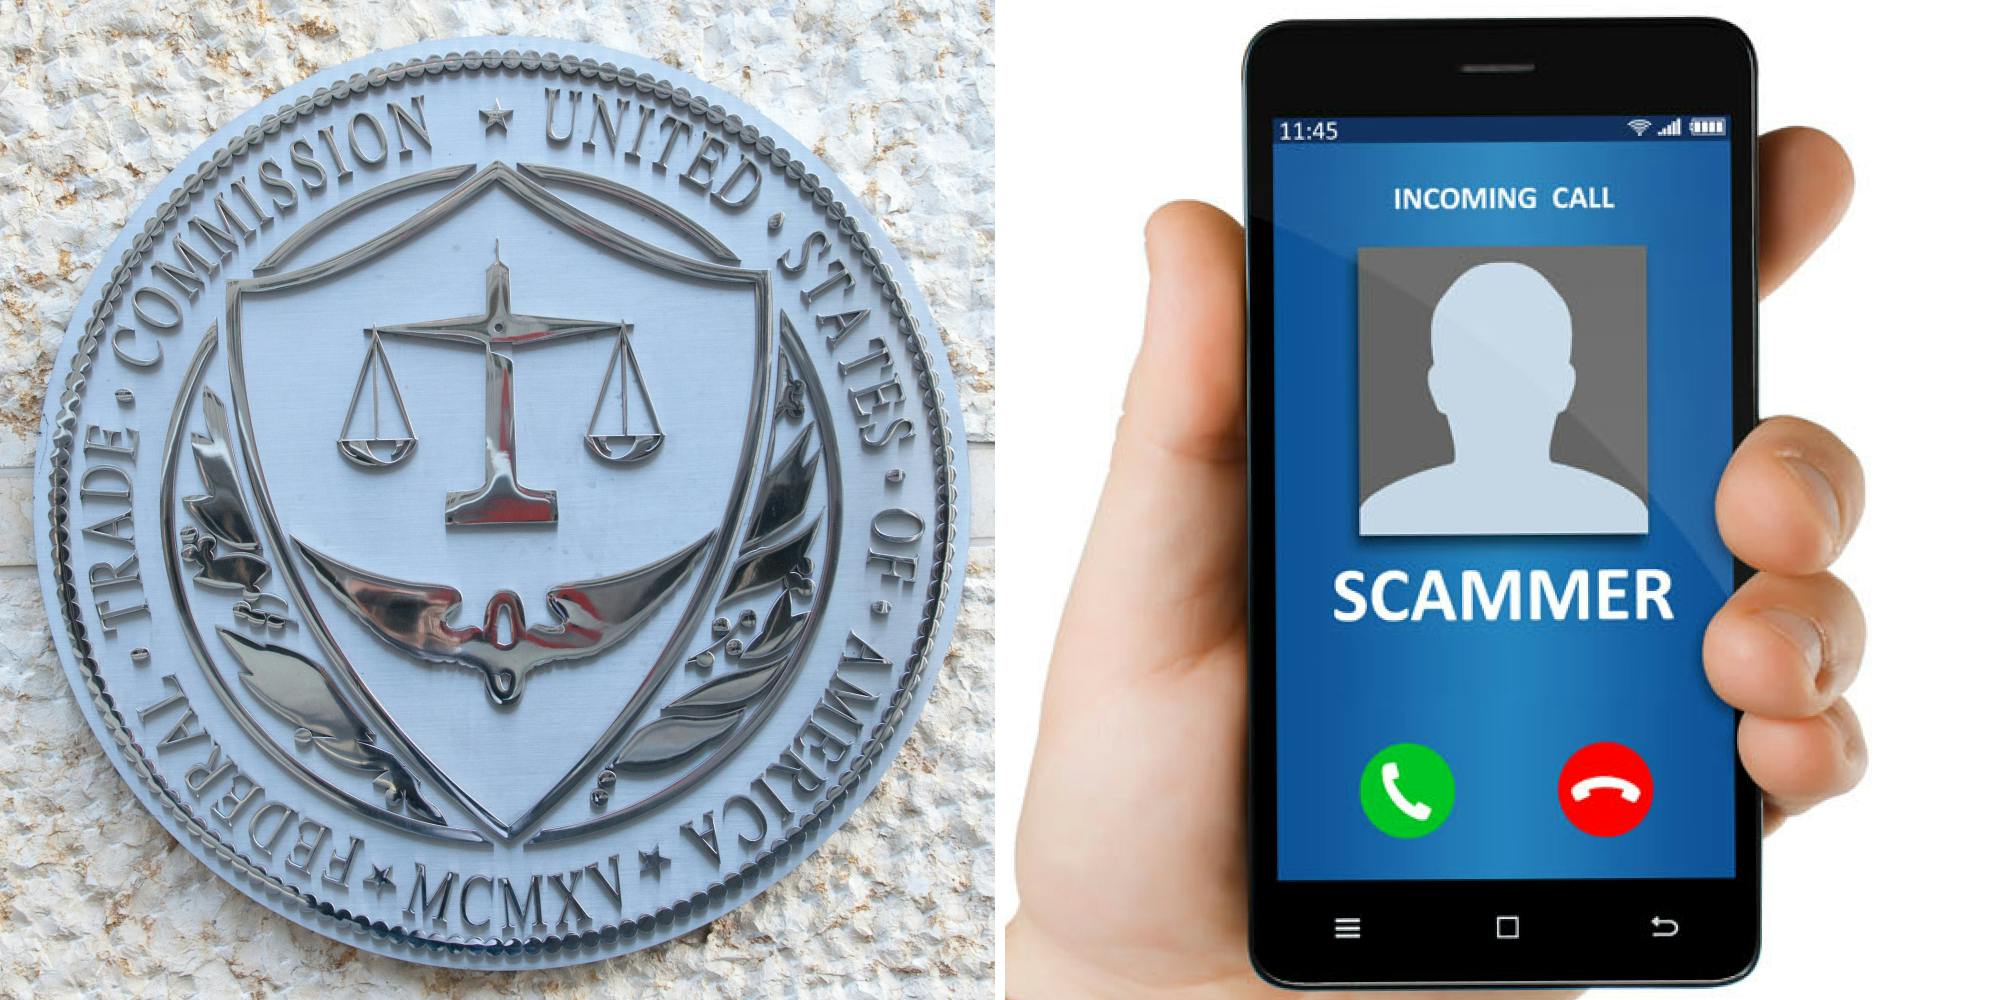 Federal Trade Commission circular plaque on white wall (l) Hand holding phone that says "INCOMING CALL" "SCAMMER" (r)